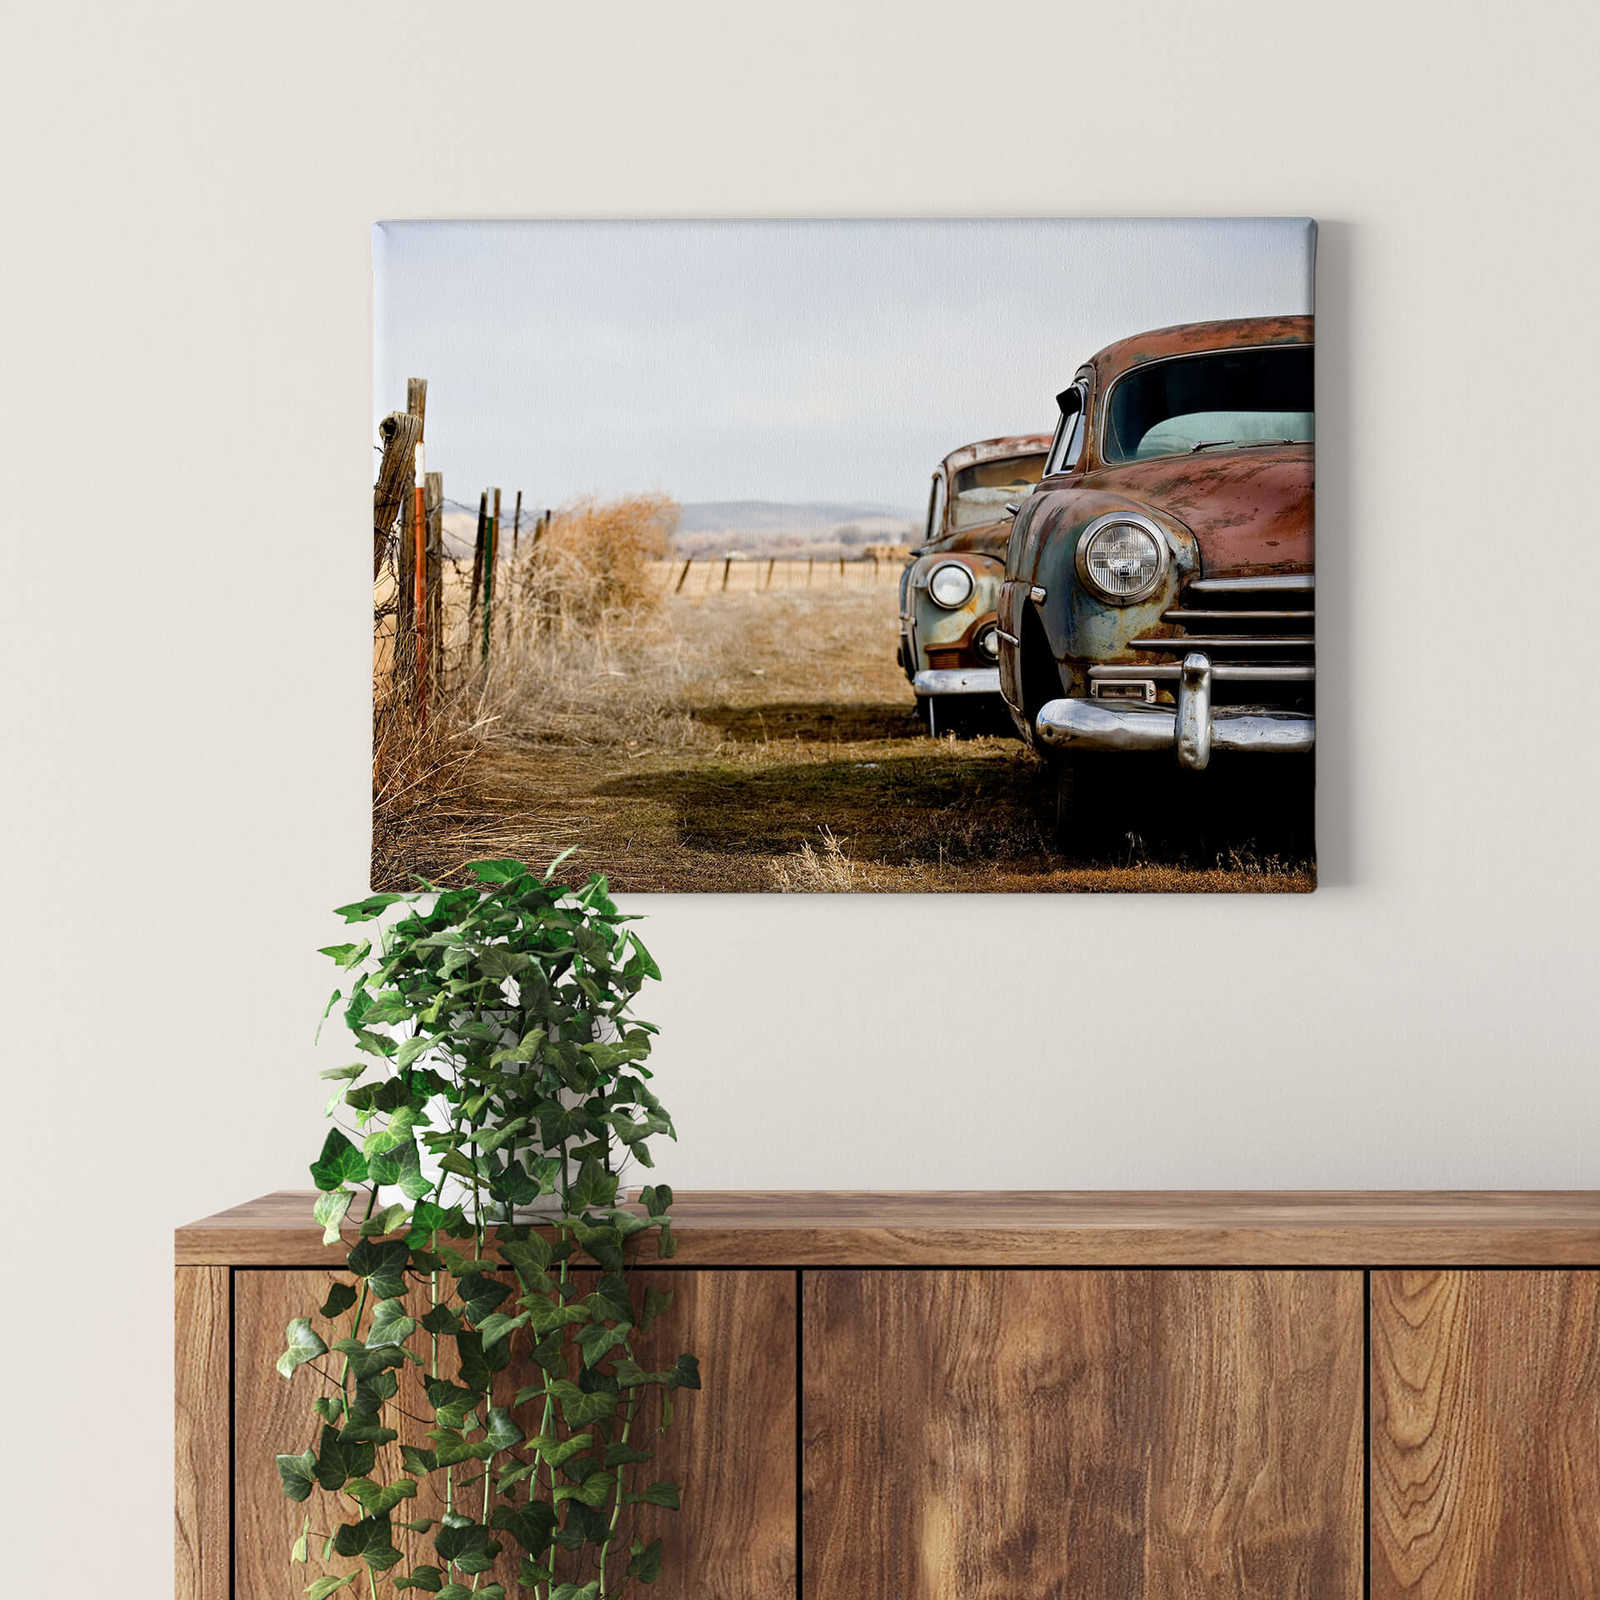             Canvas print vintage America with rusty oldtimer
        